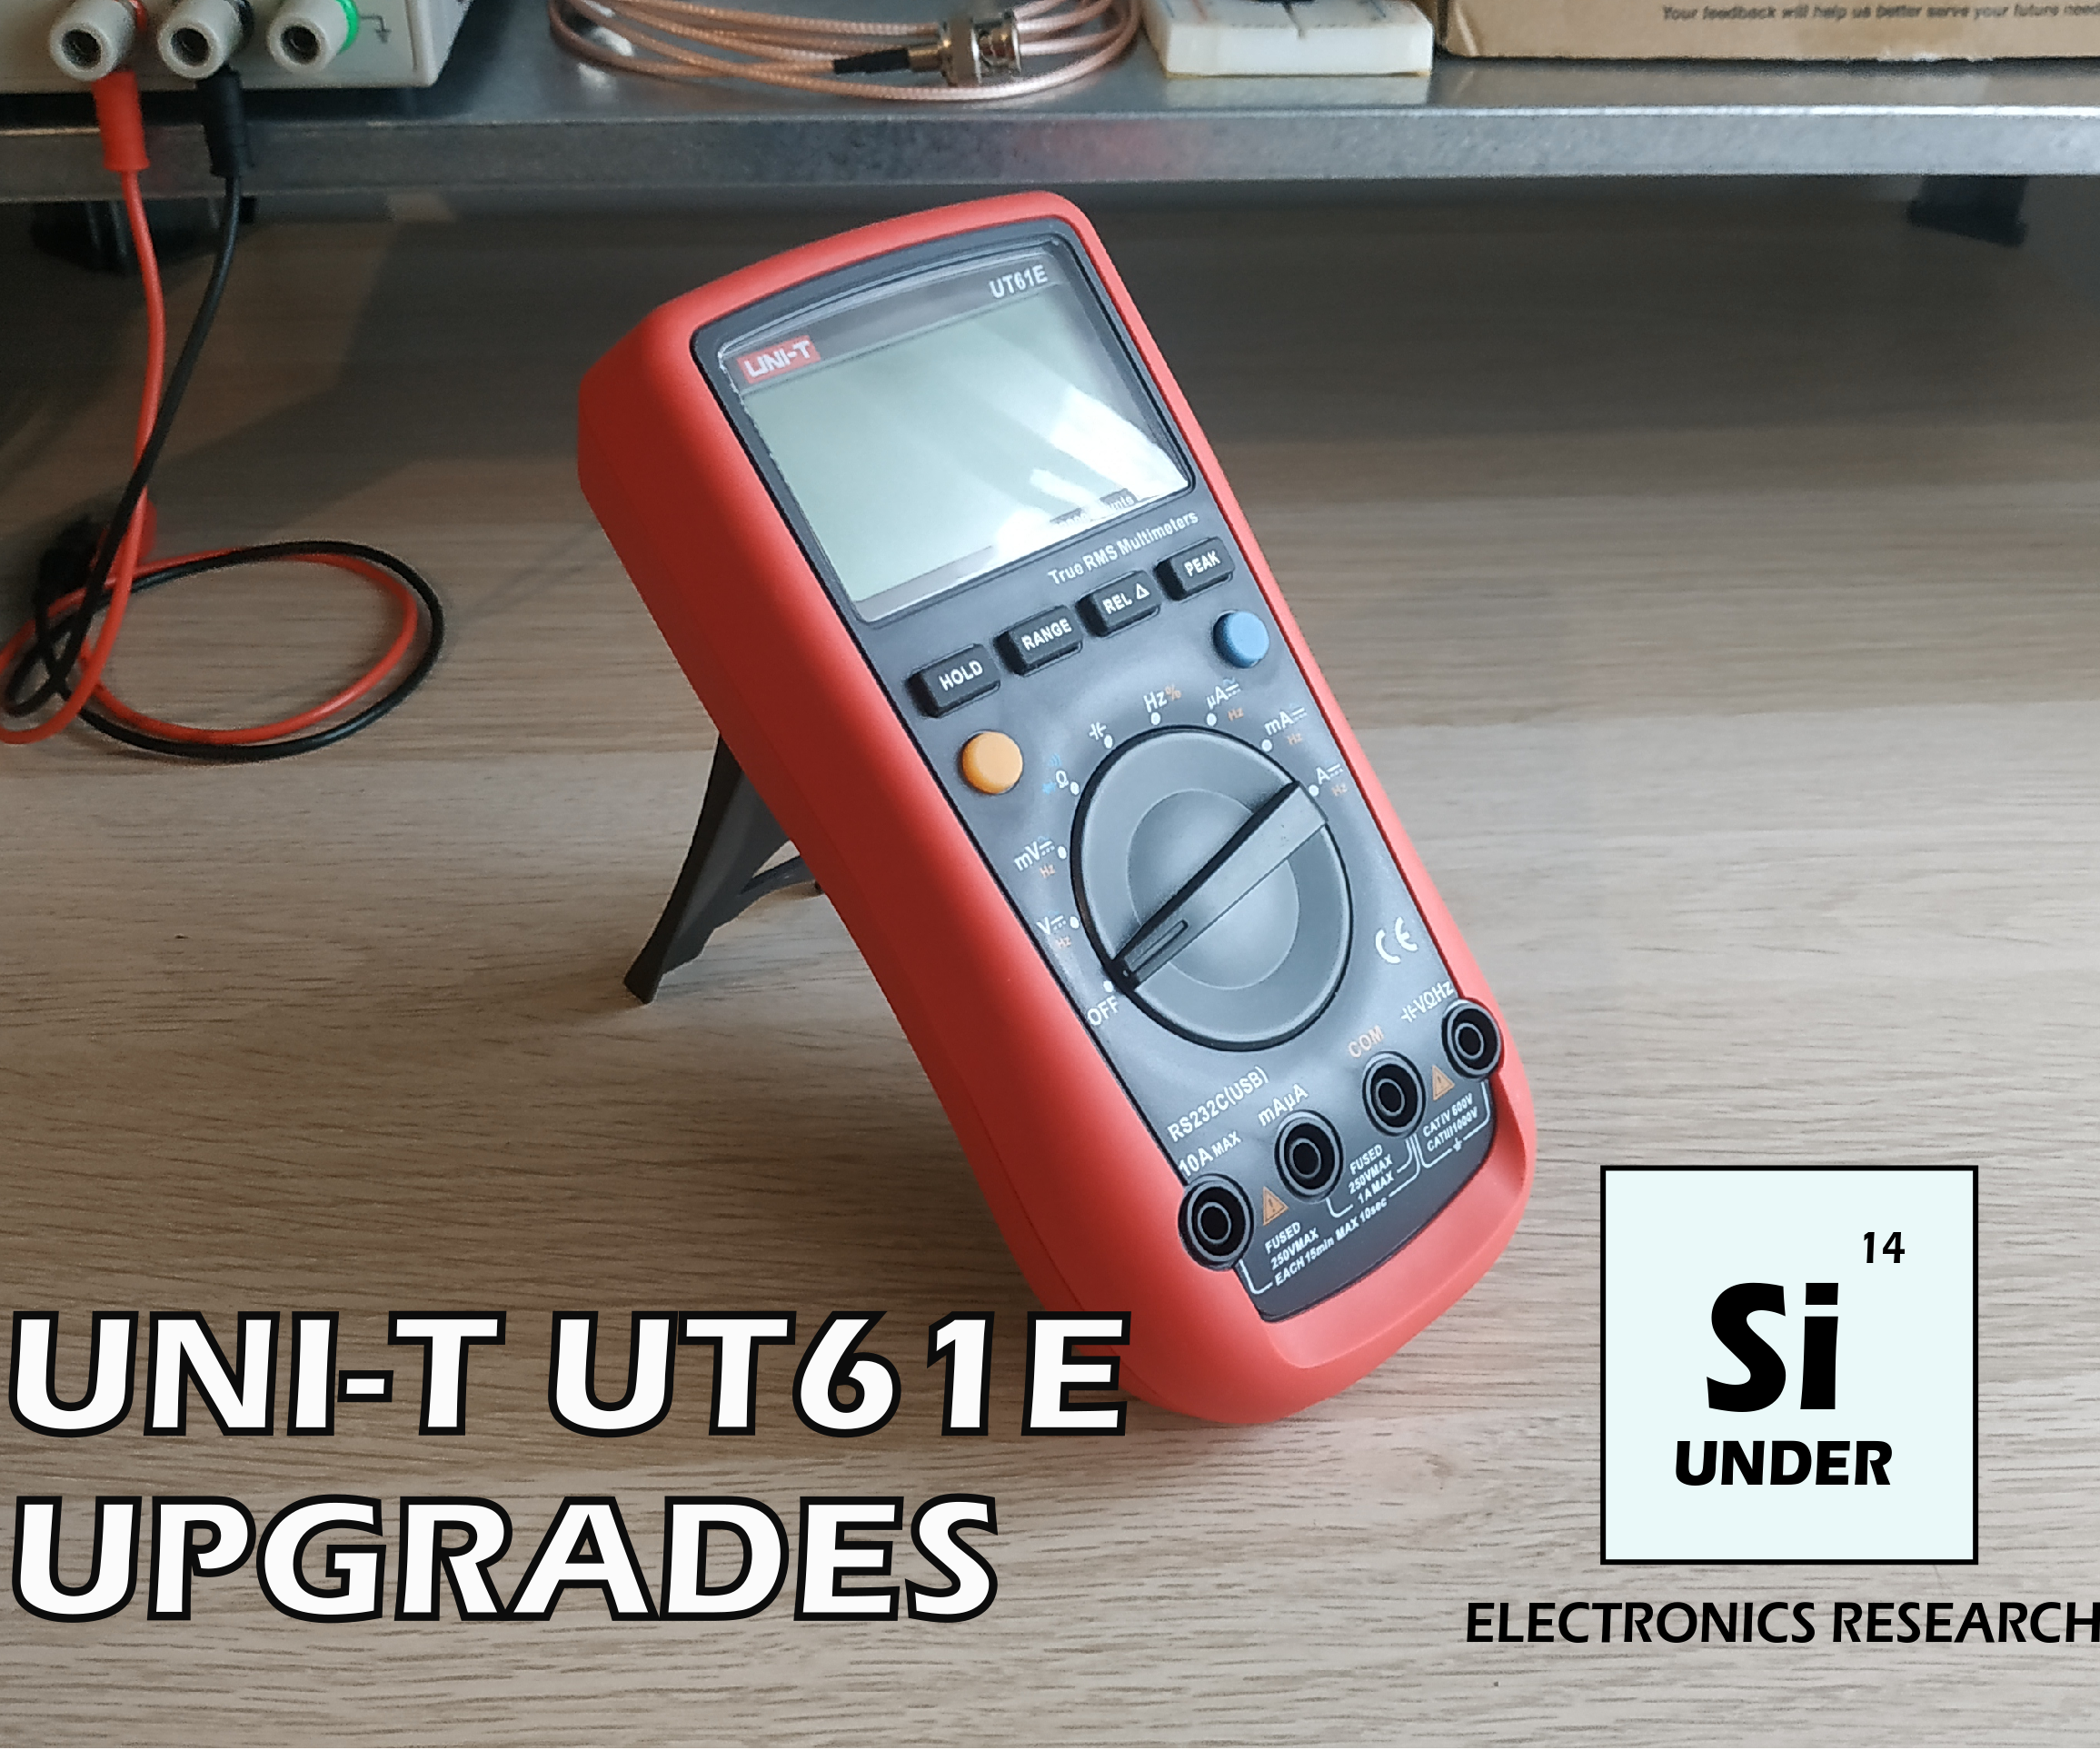 Voltage and Current Protection Upgrades for UNI-T UT61E